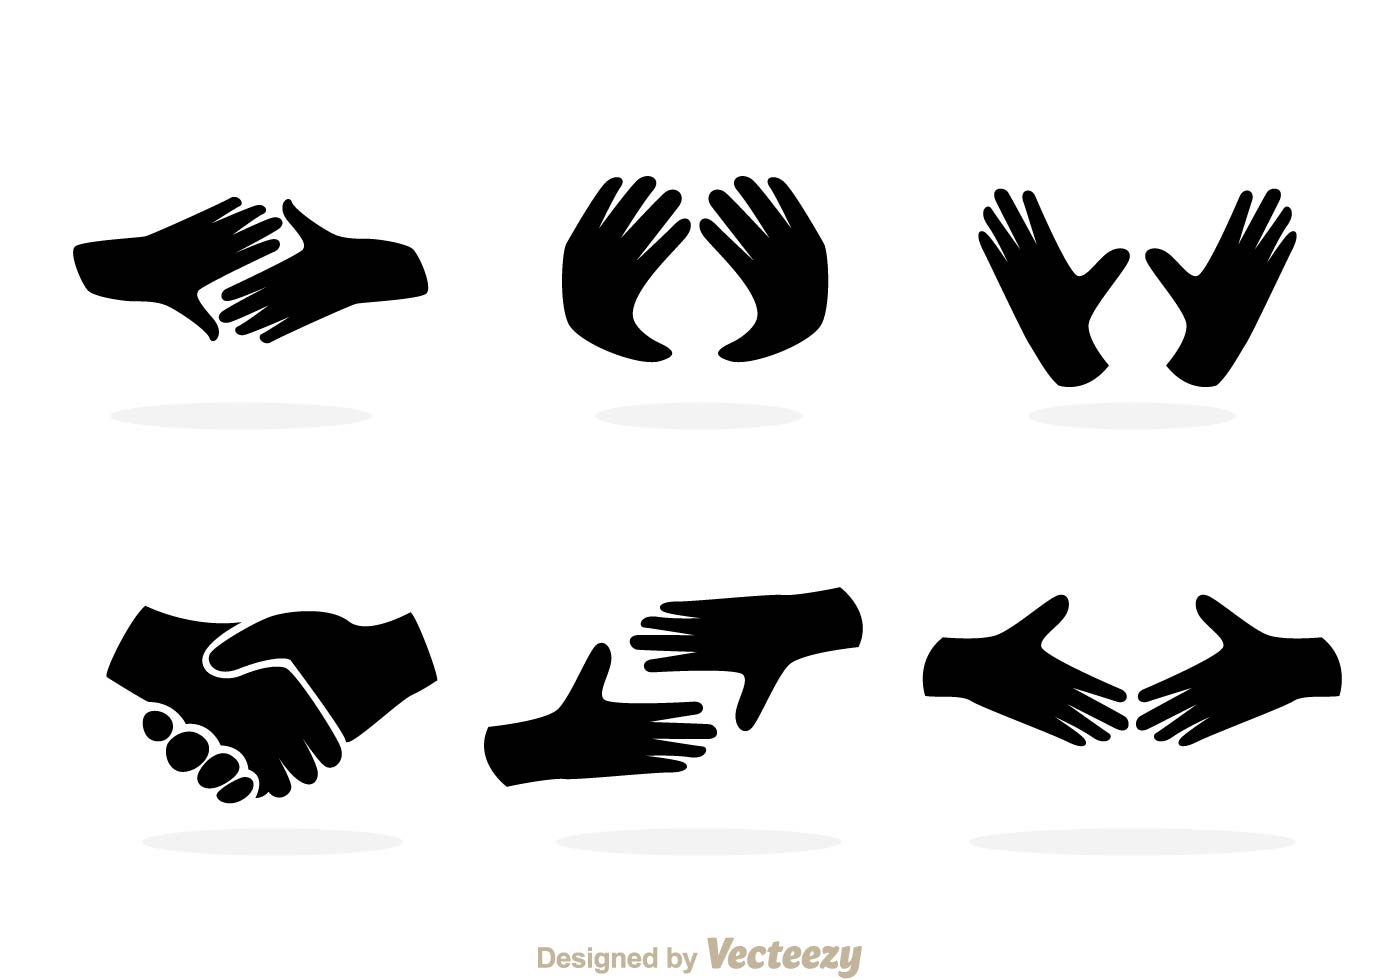 Black Hand Icons - Download Free Vector Art, Stock Graphics & Images